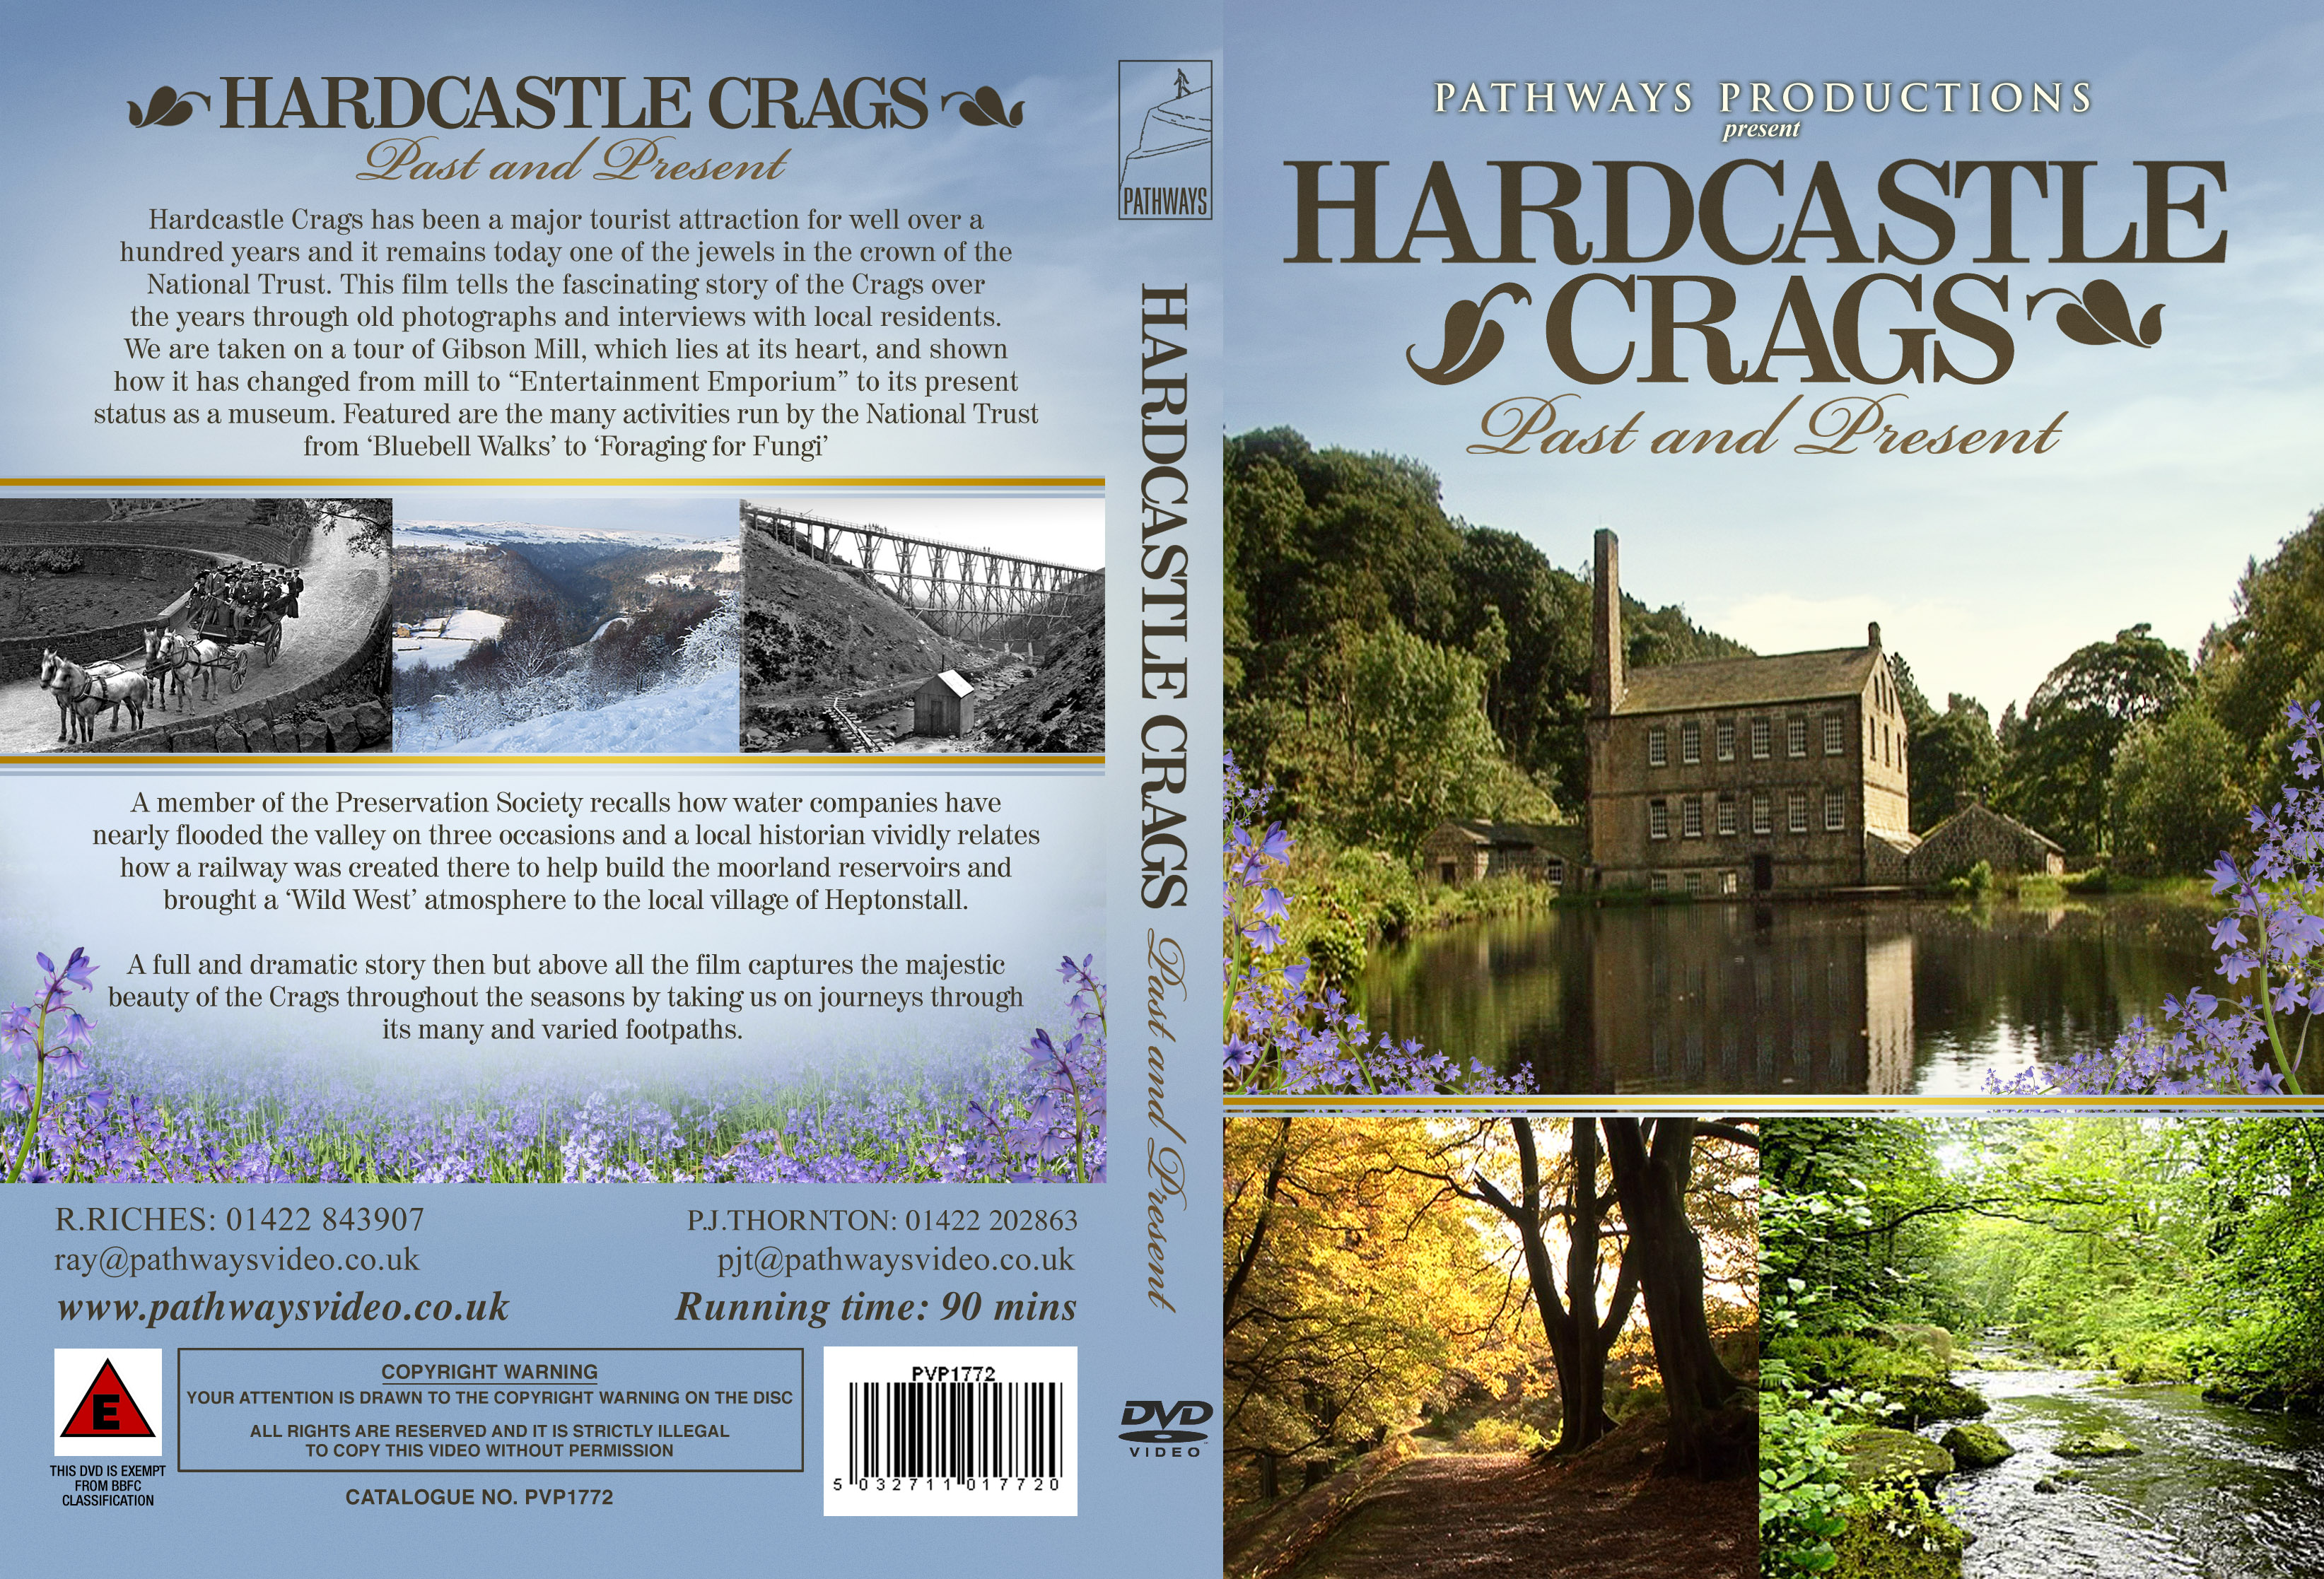 Hardcastle Crags by Pathways Productions